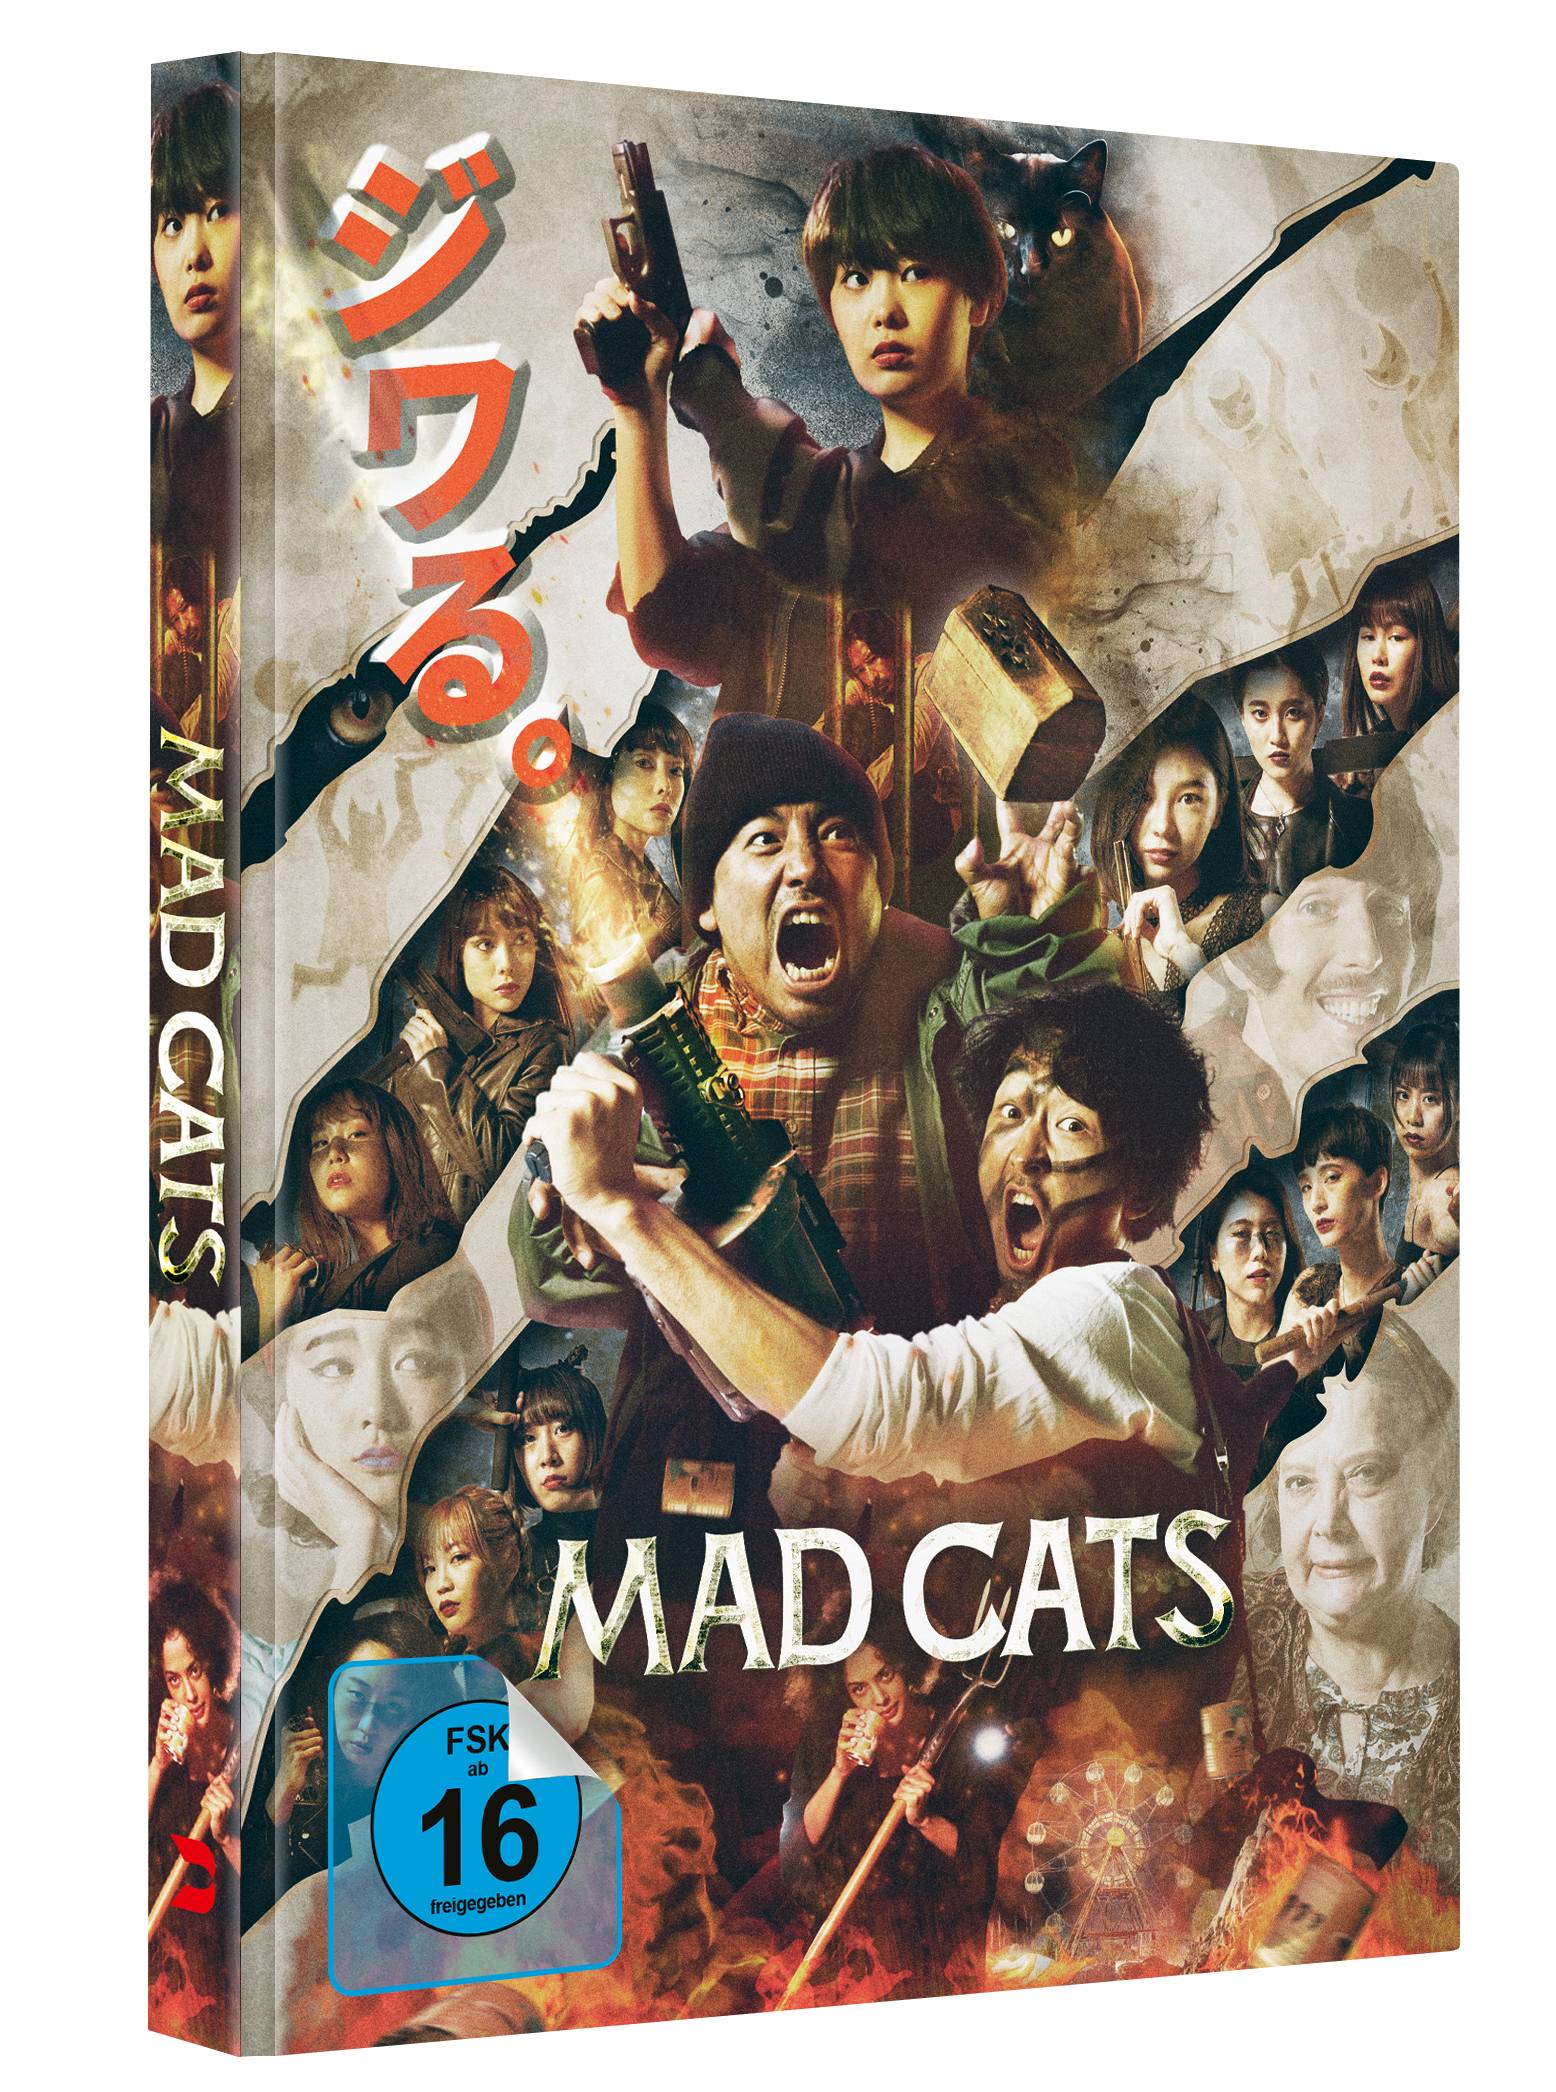 Mad Cats - 2-Disc Limited Edition Mediabook (Blu-ray + DVD)